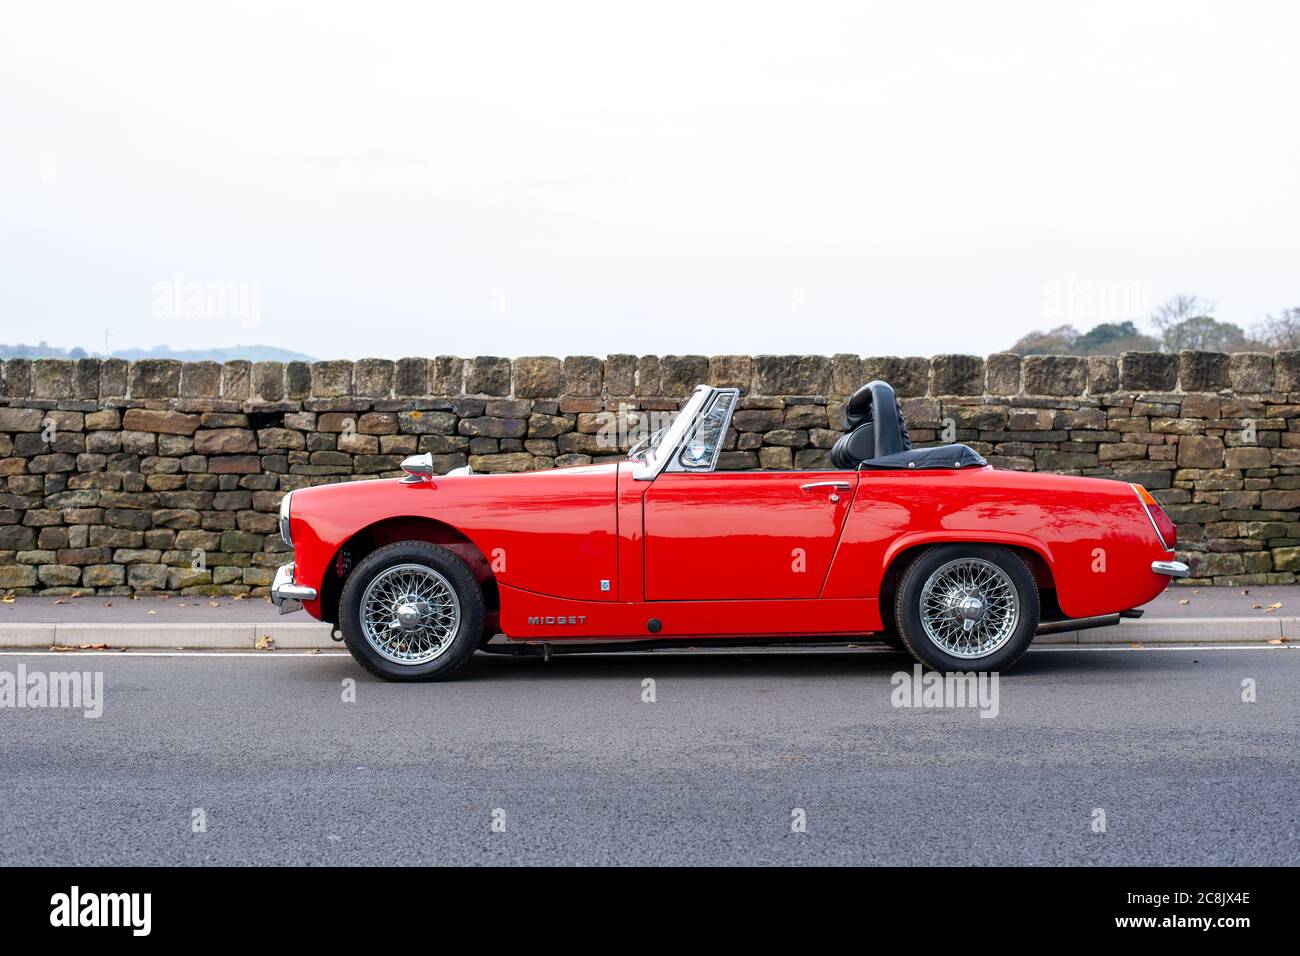 MG Midget parked by a stone wall on a country road Stock Photo